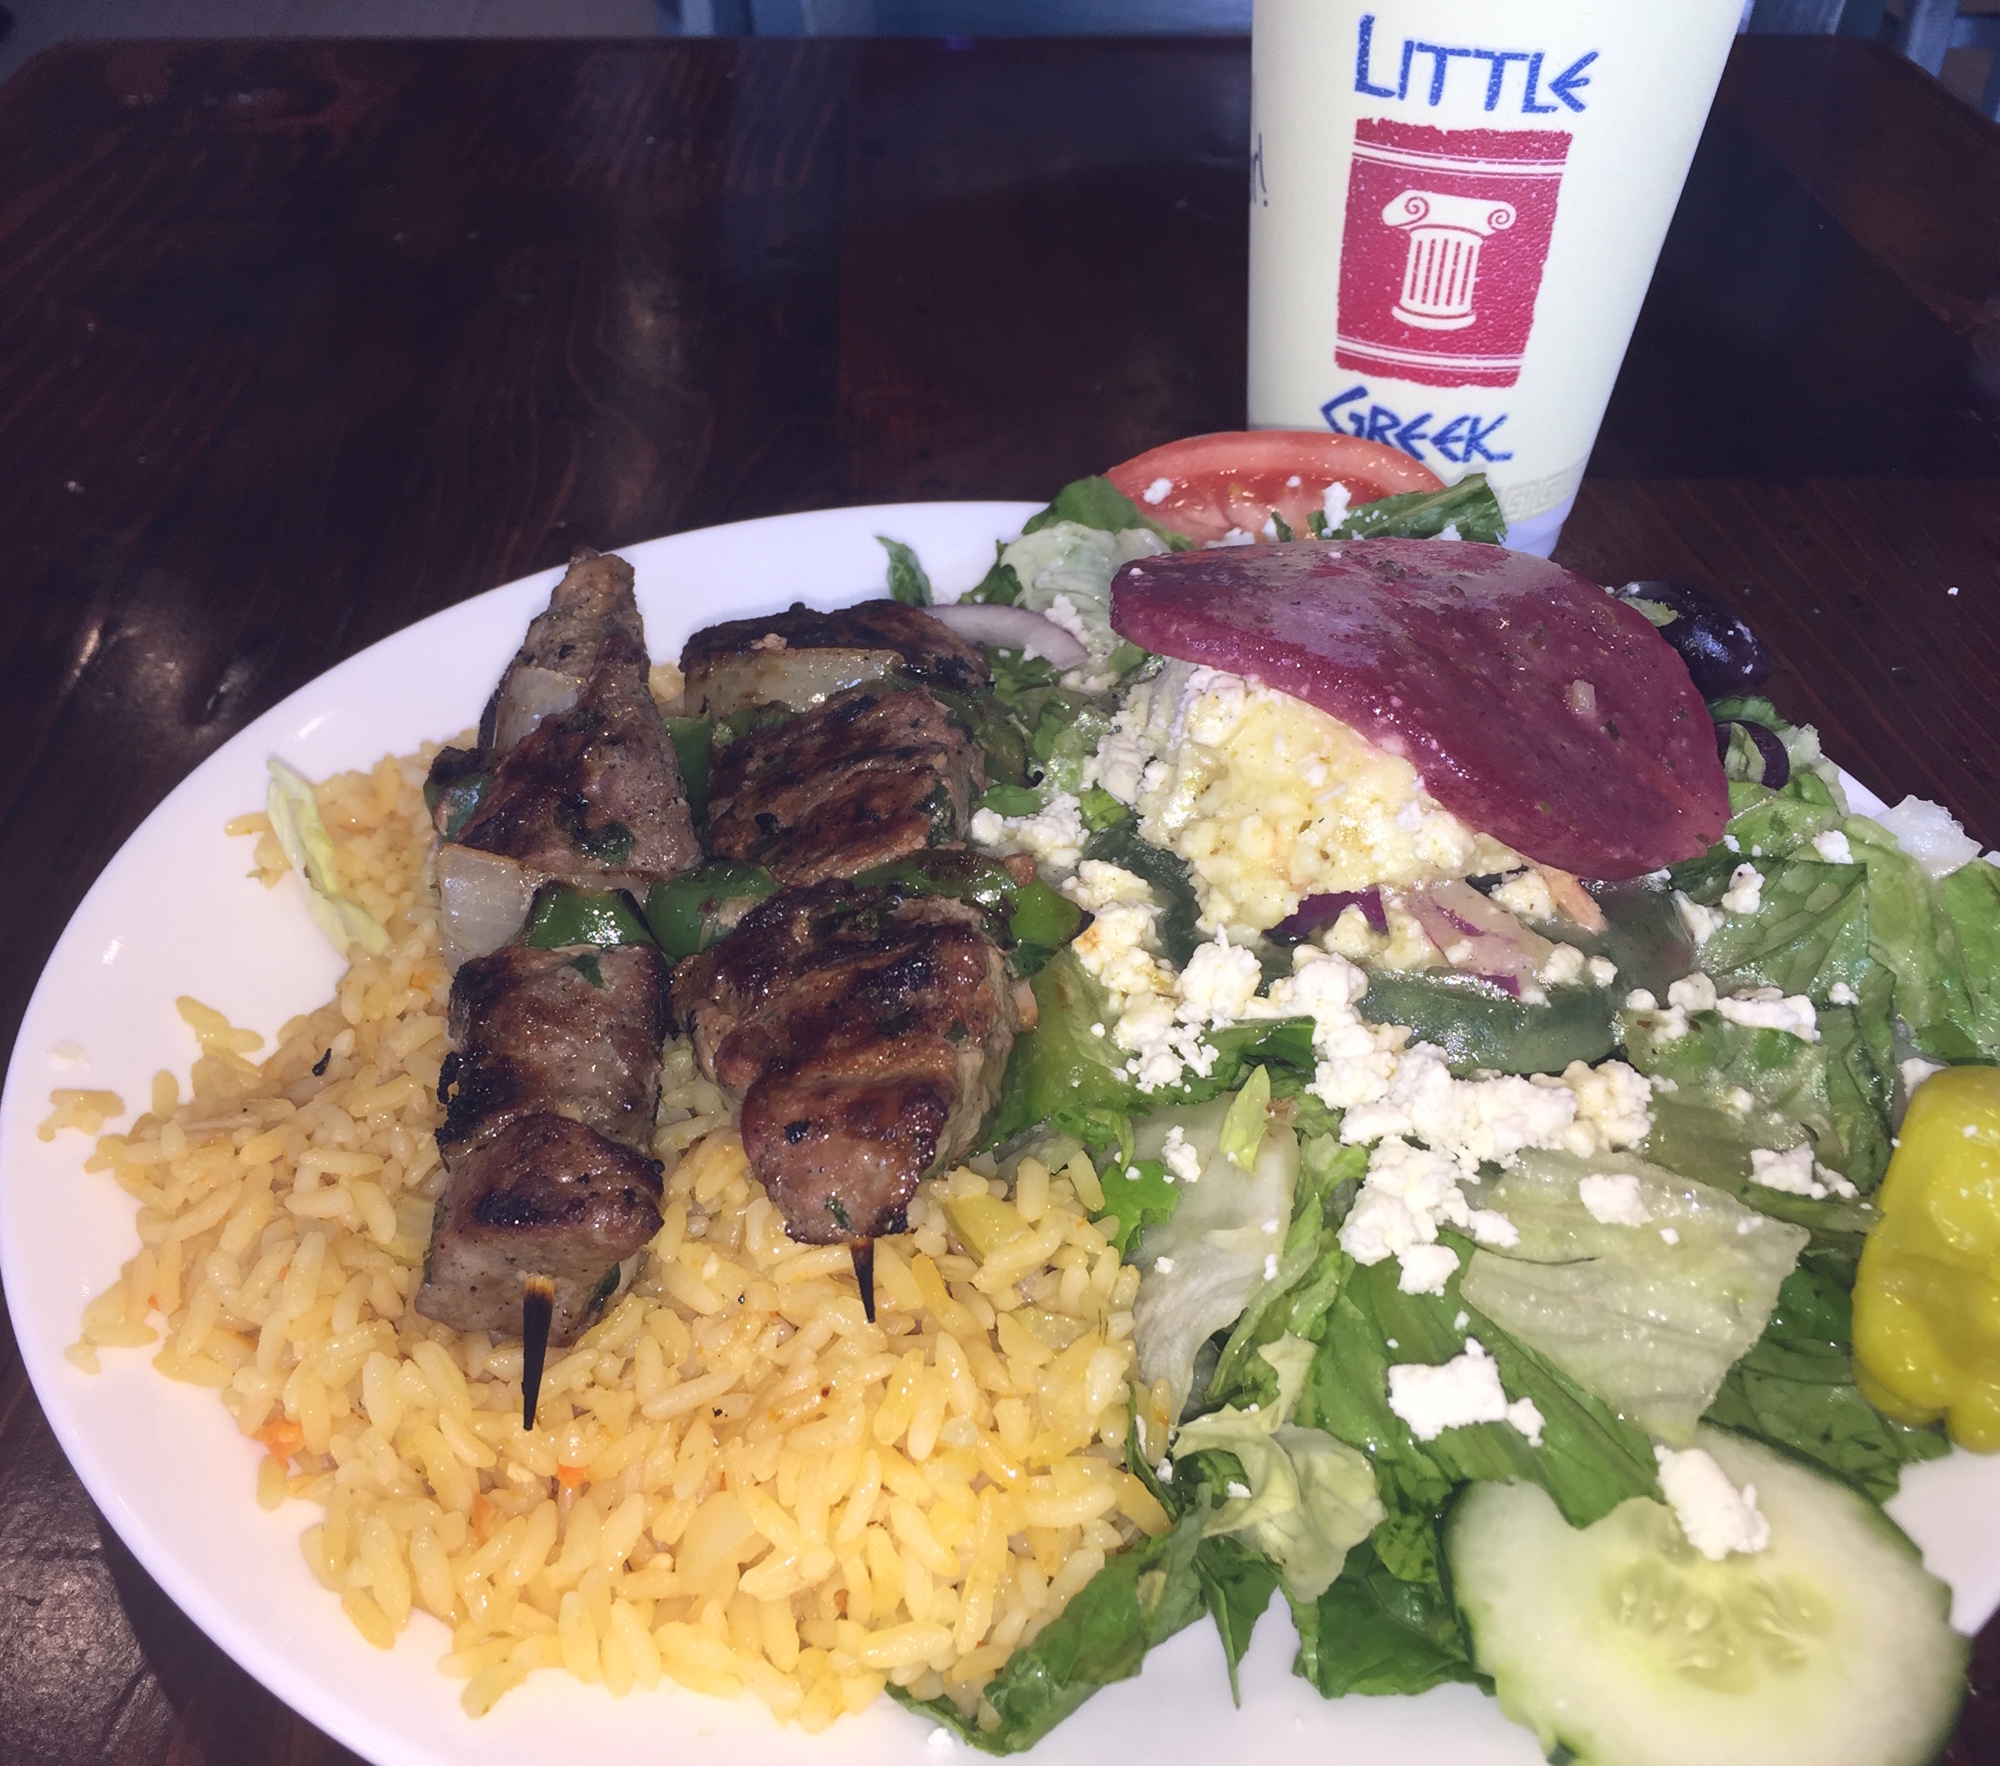 The steak skewers (souvlaki) come in two options: lite or dinner. The lite option comes with two skewers and the dinner option comes with three.